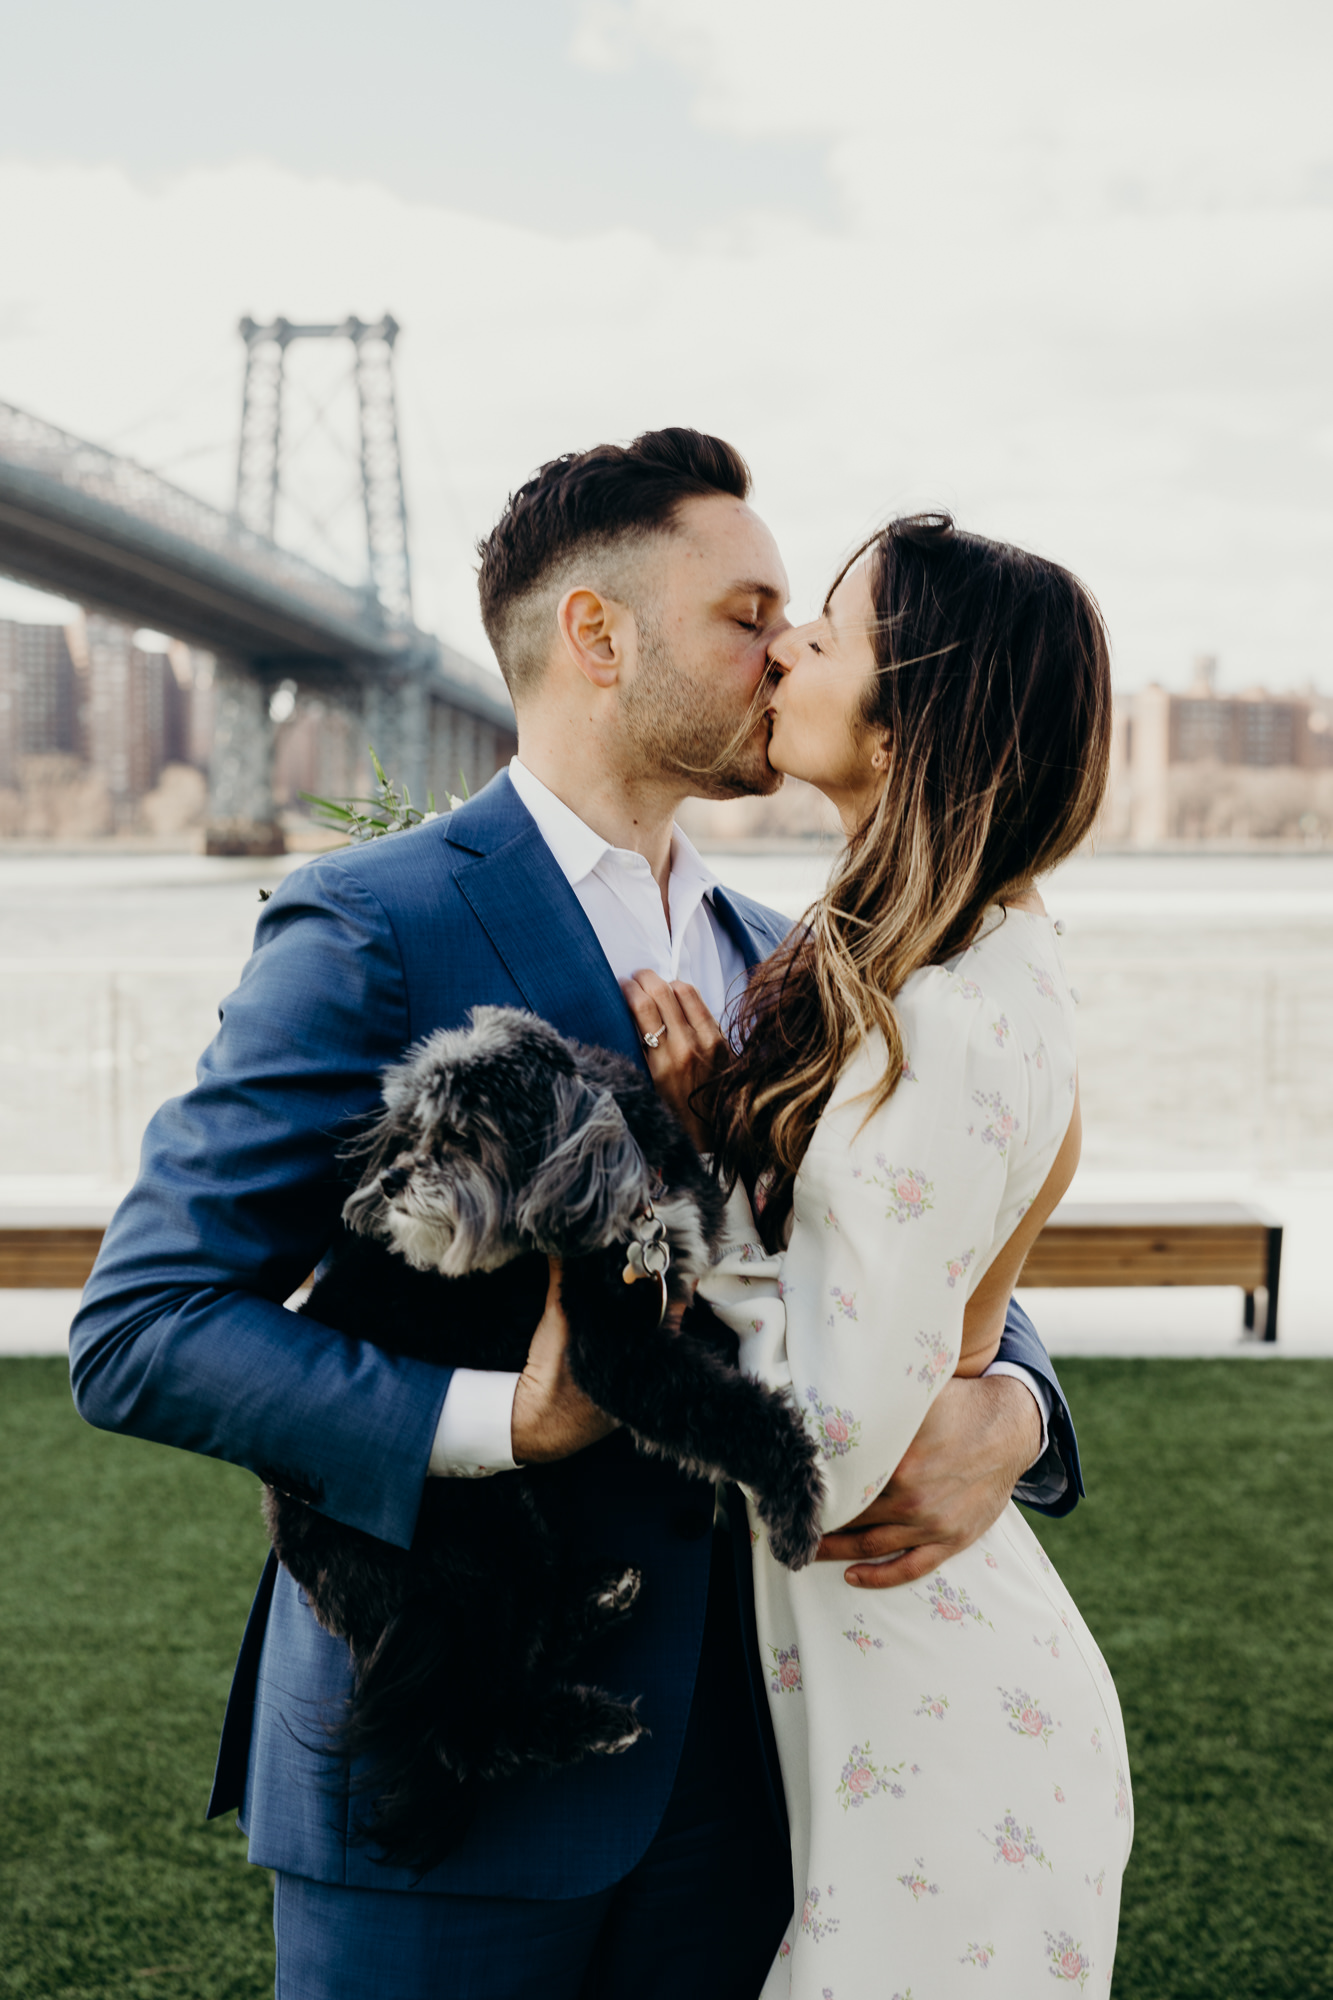 portrait of a bride and groom with their dog on their wedding day at domino park in brooklyn, ny